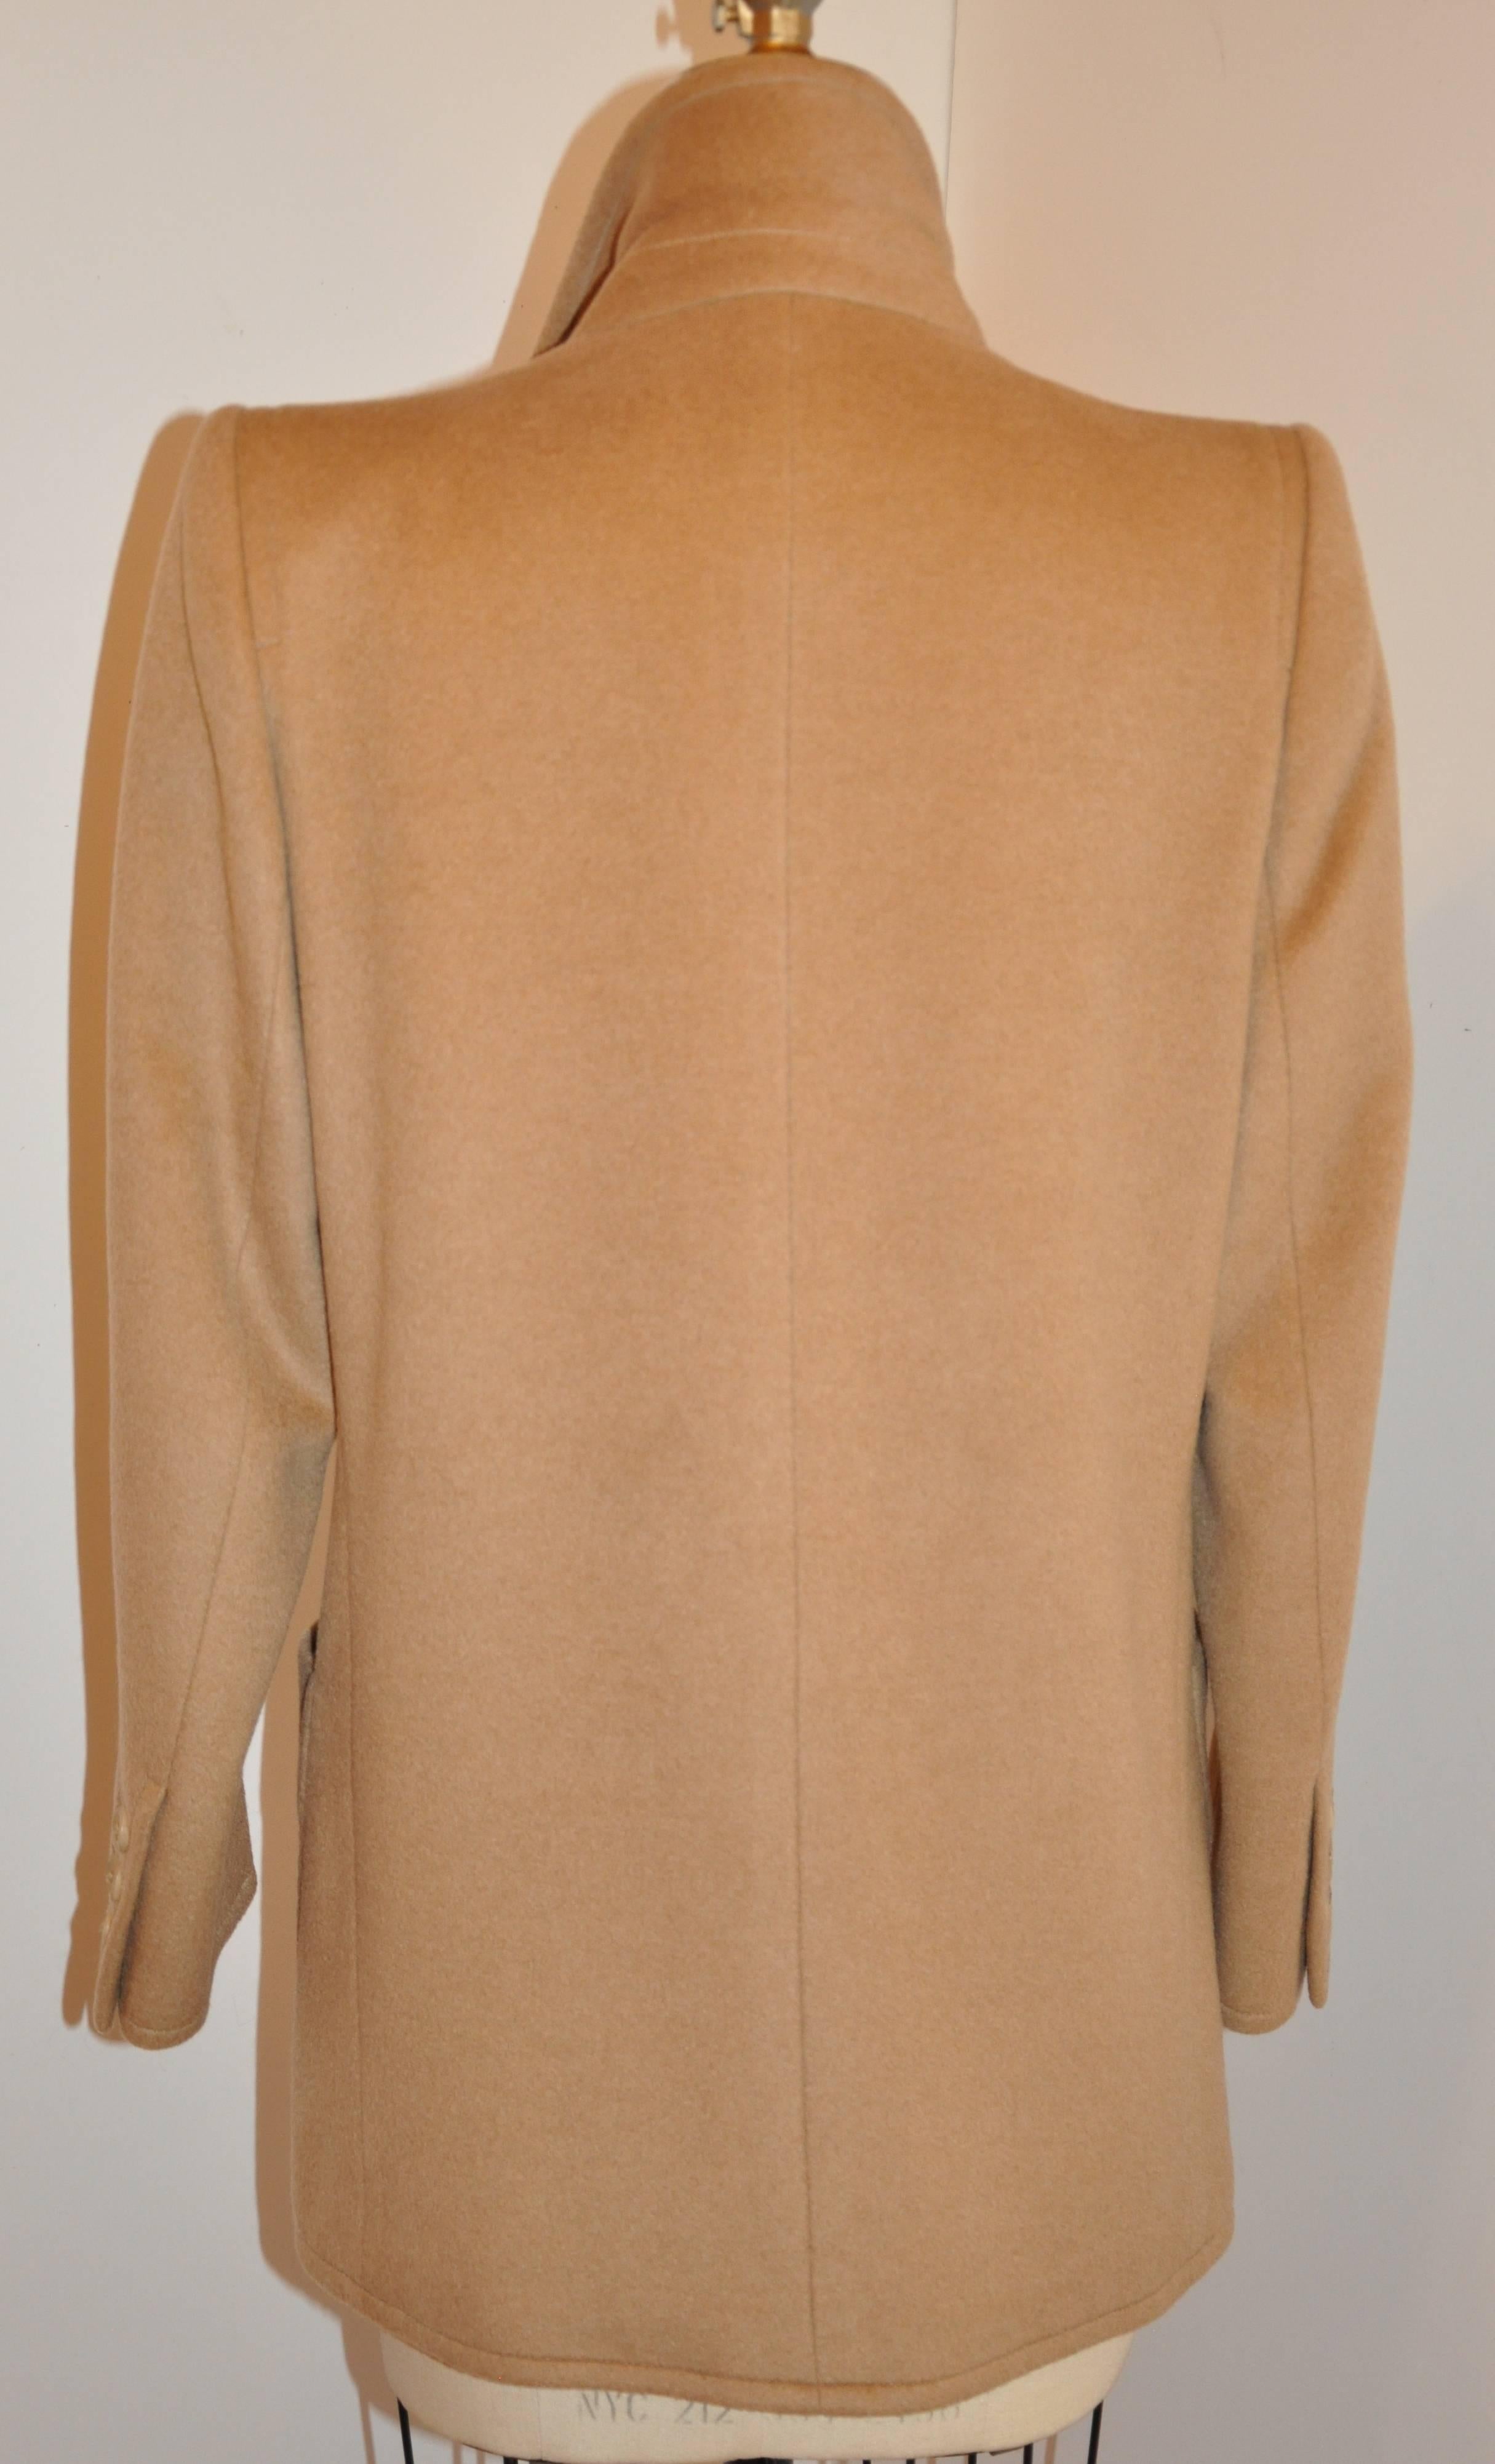      Yves Saint Laurent wonderfully timeless and simply elegant camel hair camel three-button front jacket with patch pockets measures 30 1/2